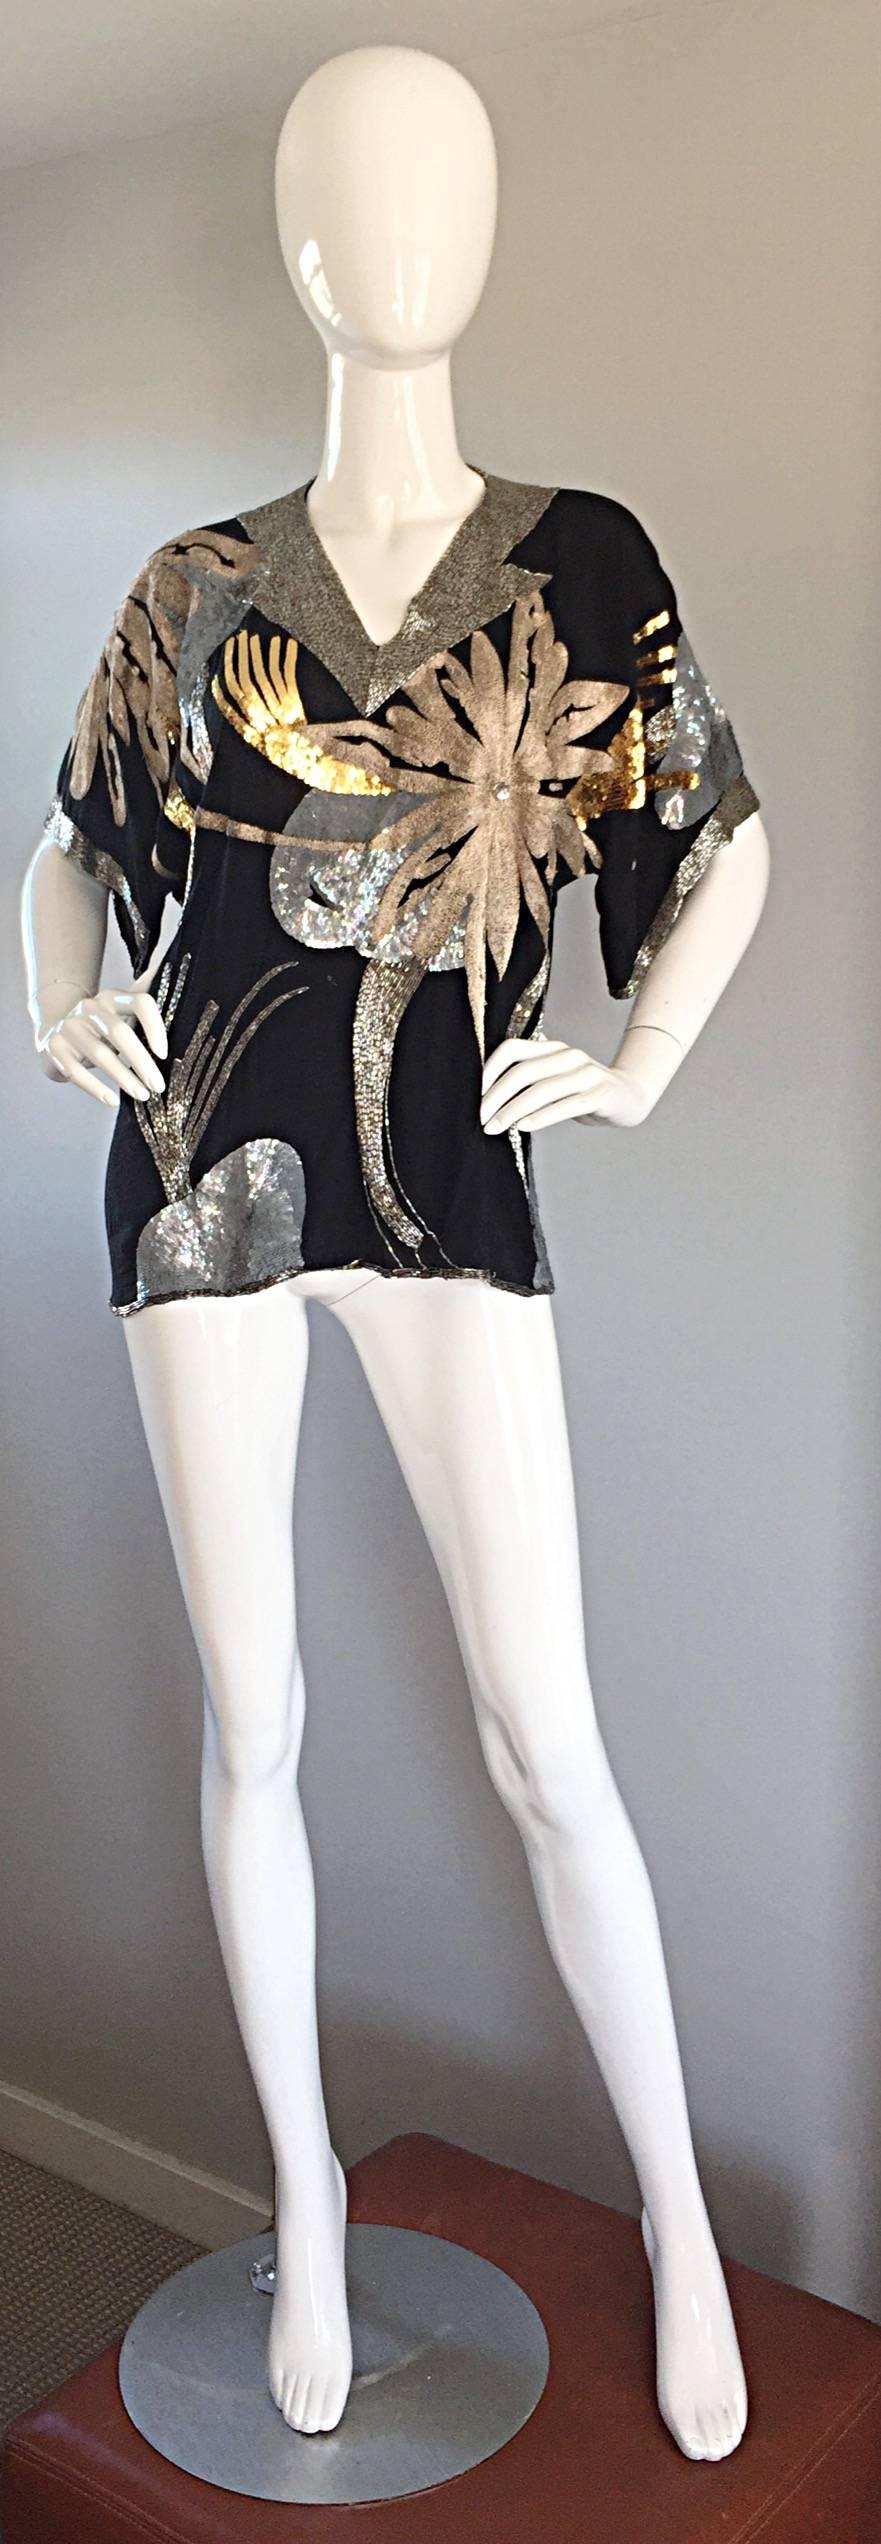 Out-of-this-world vintage CONCETTA RAFANELLO, for St. Martin, black silk top! Incredible amount of detail, with thousands of hand-sewn sequins, beads, and rhinestones throughout the front, back, and sleeves! Hand-sewn silk embroidery scattered